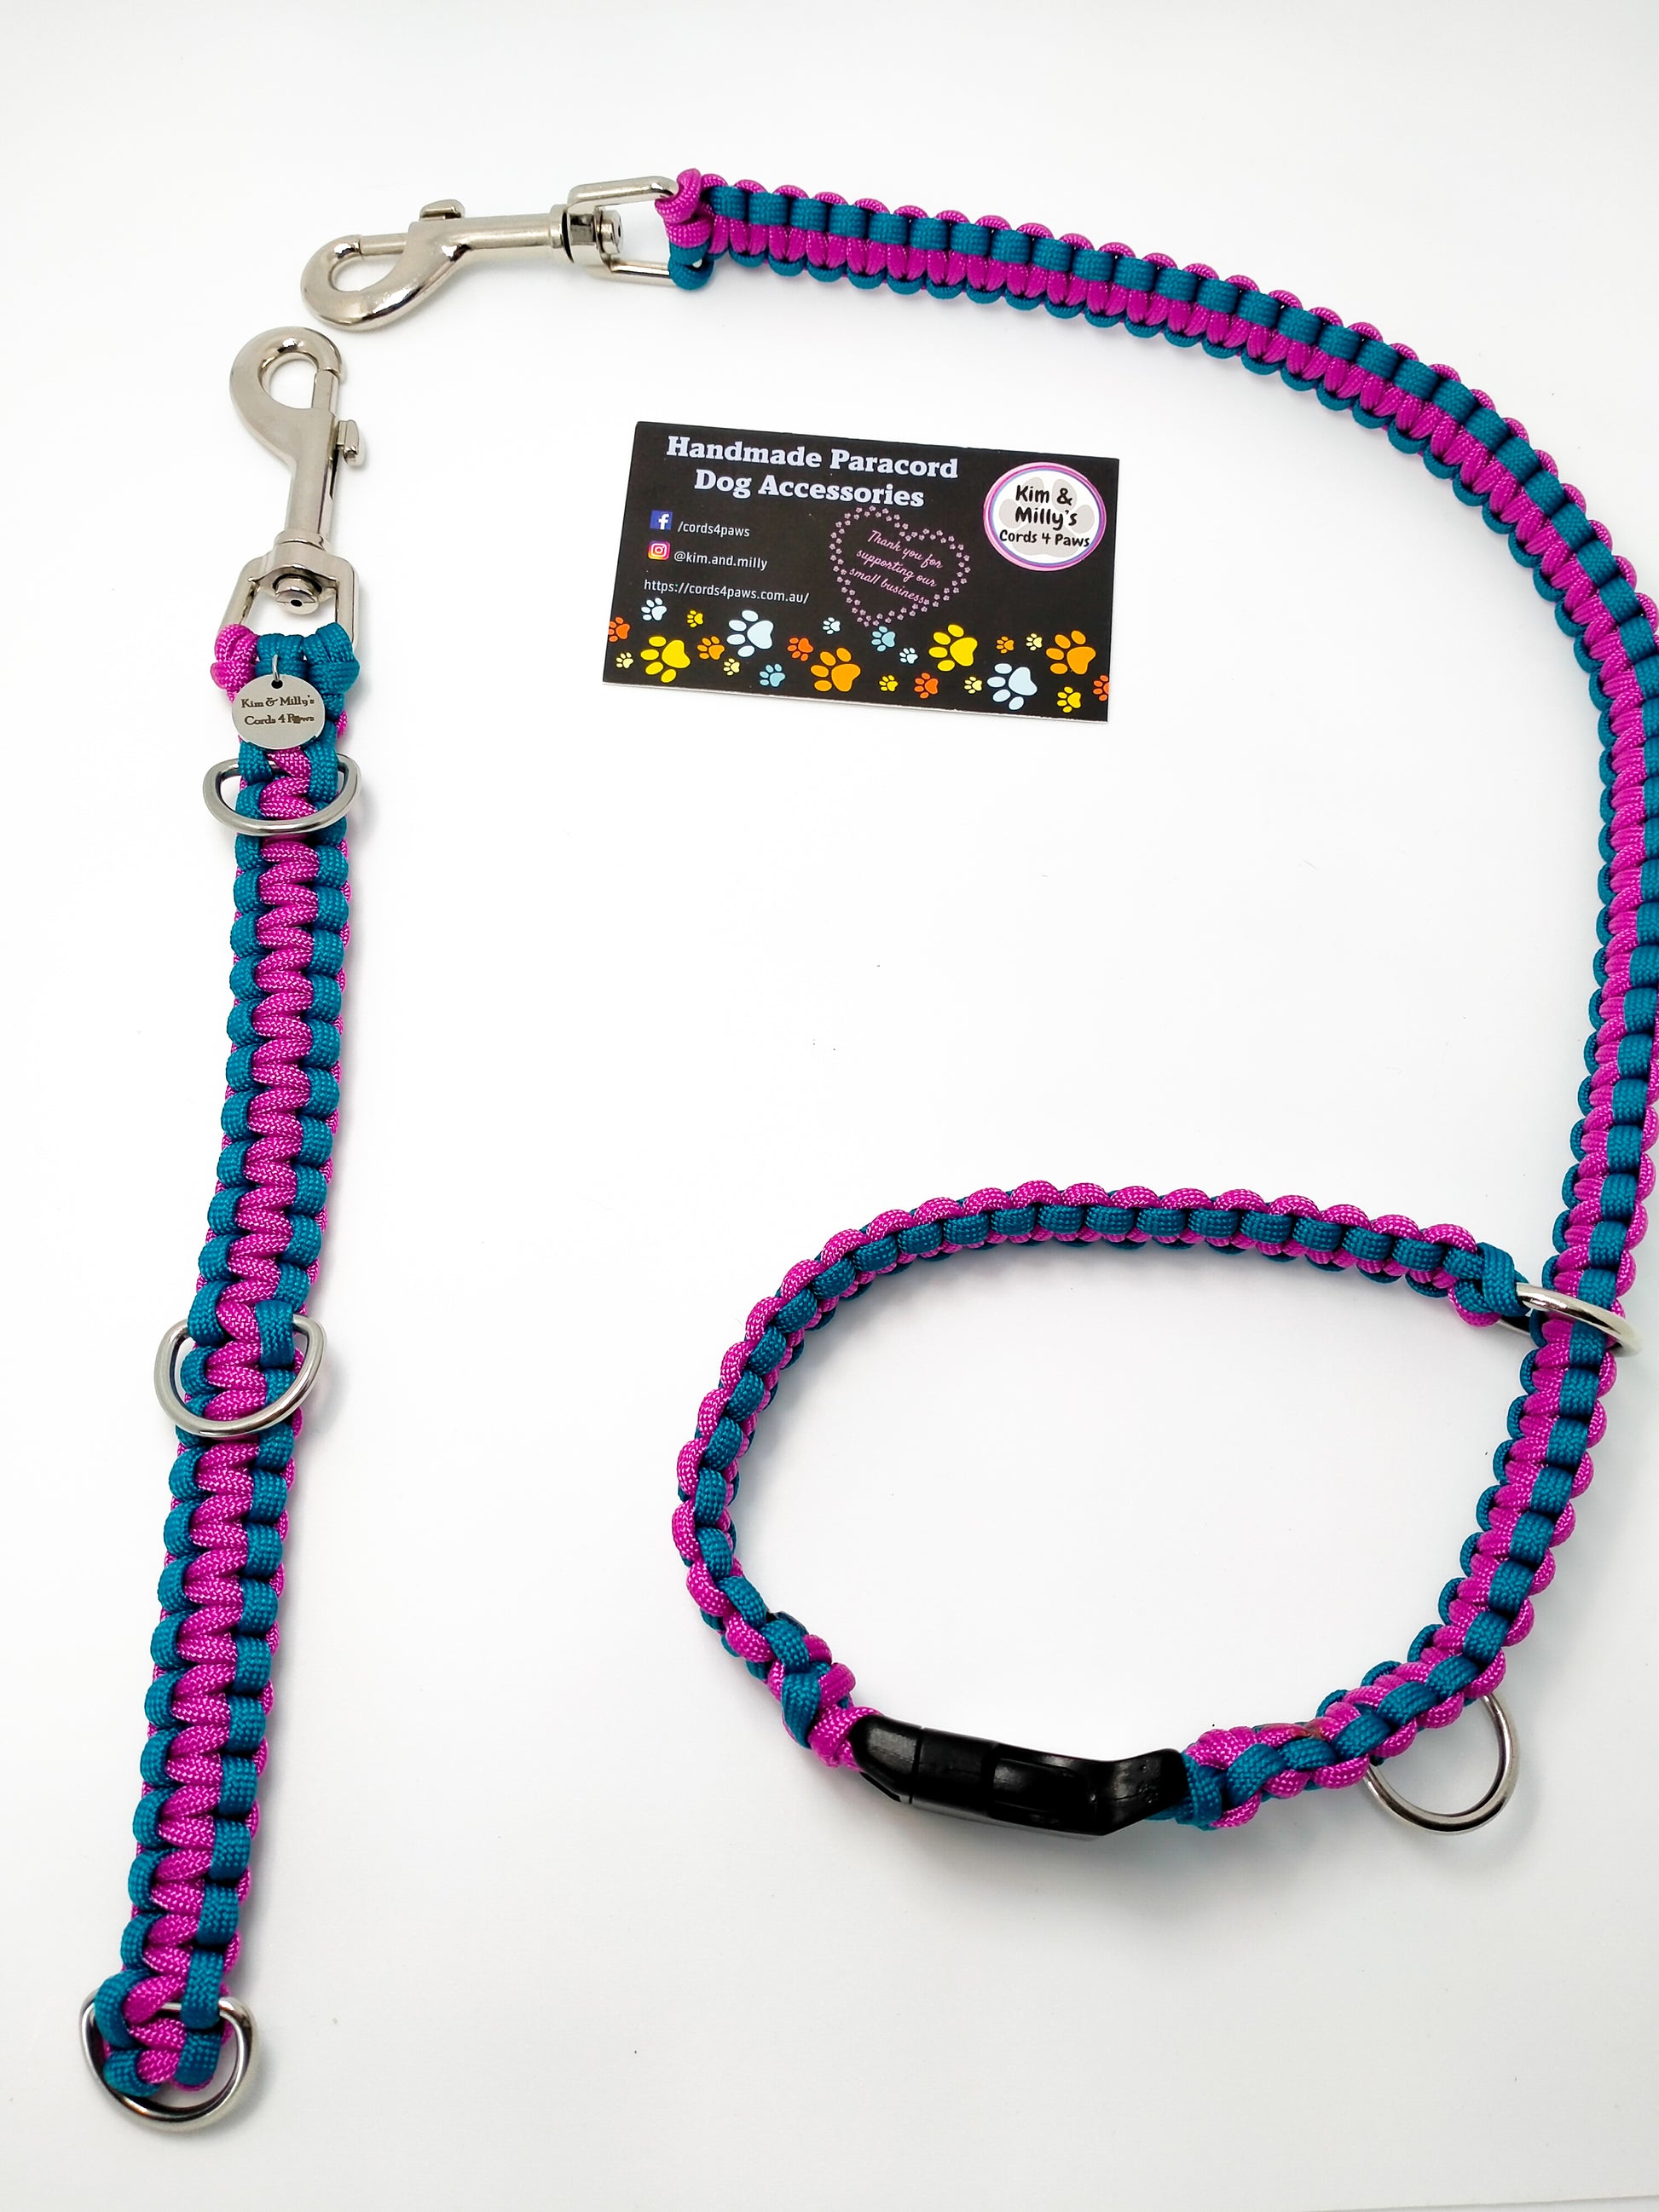 Groomer's Loop – Kim & Milly's Cords 4 Paws